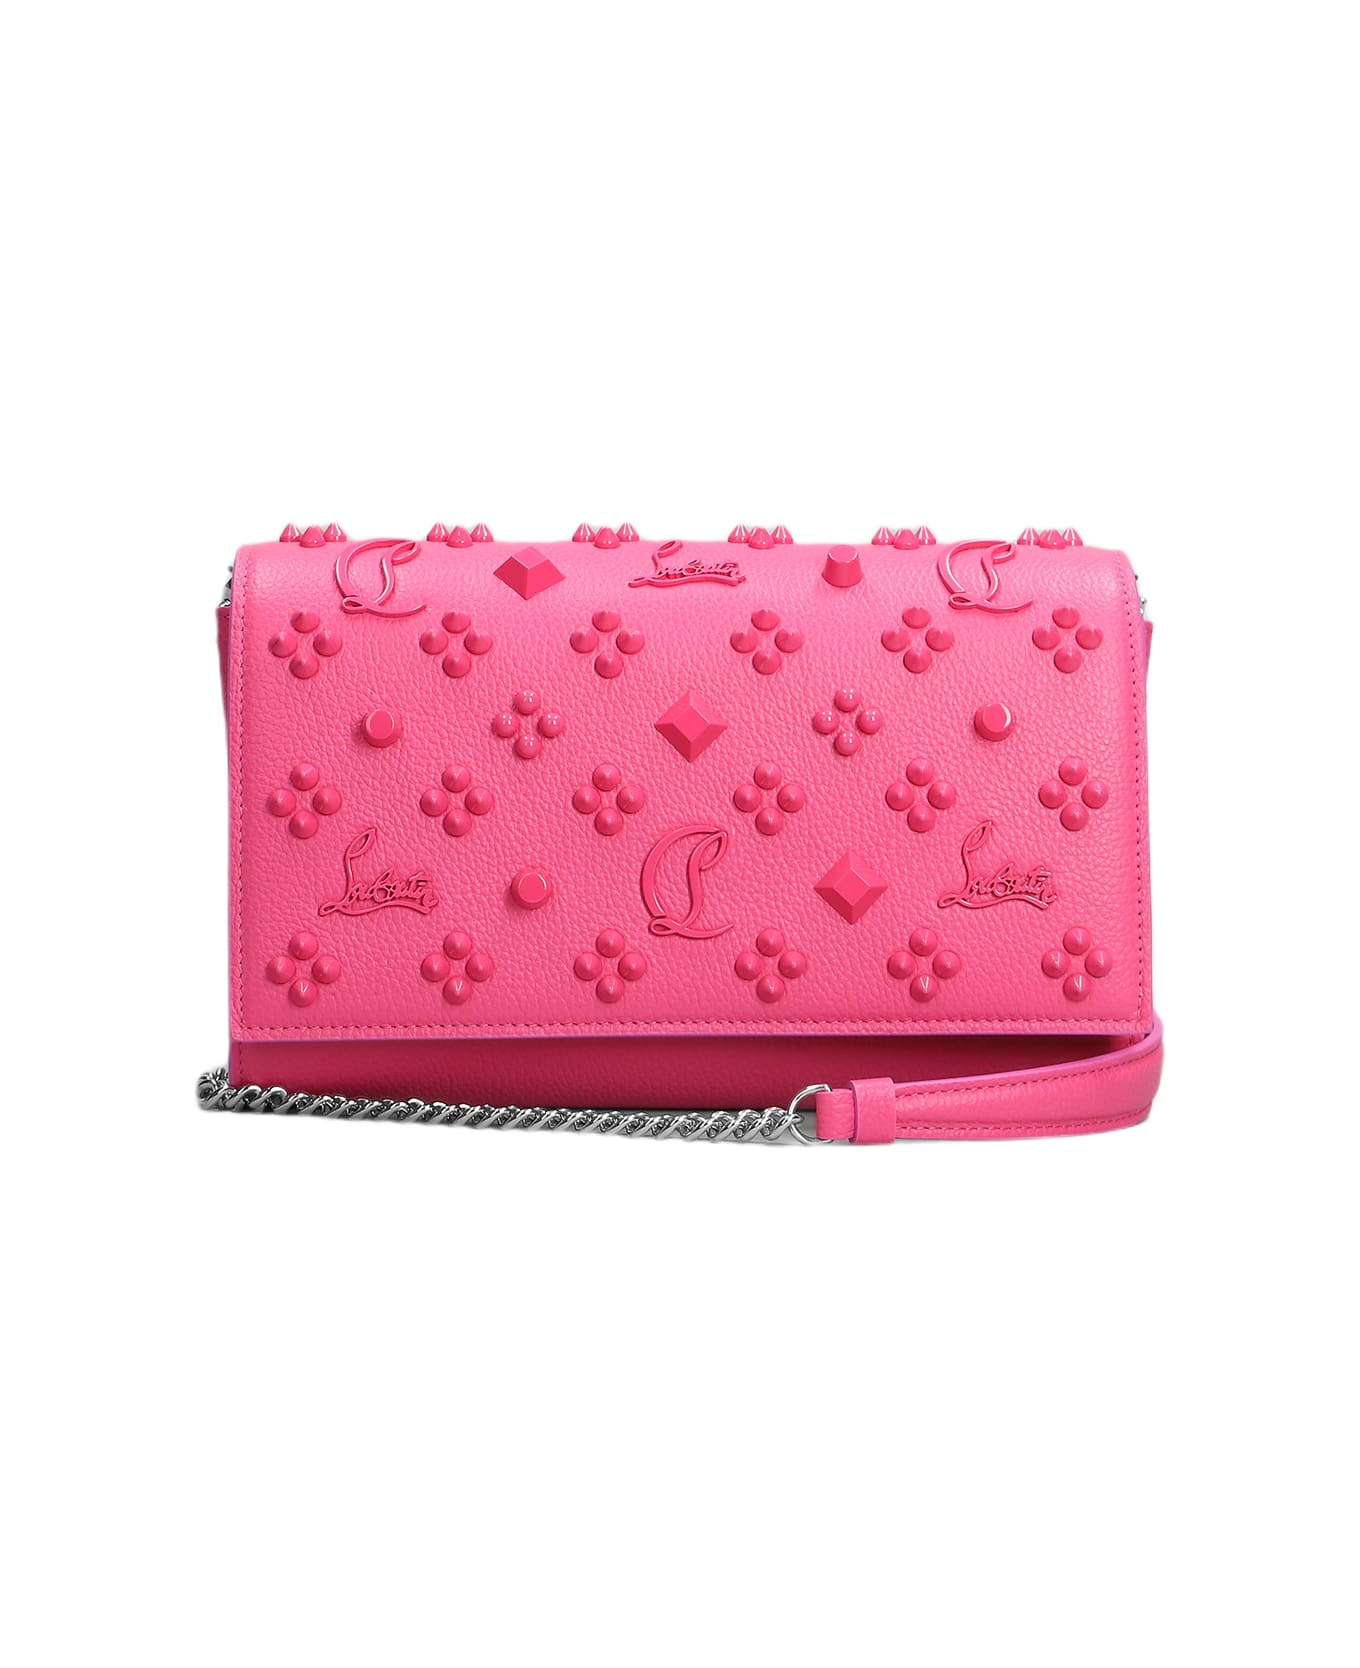 Christian Louboutin Paloma Clutch Shoulder Bag In Rose-pink Leather - rose-pink